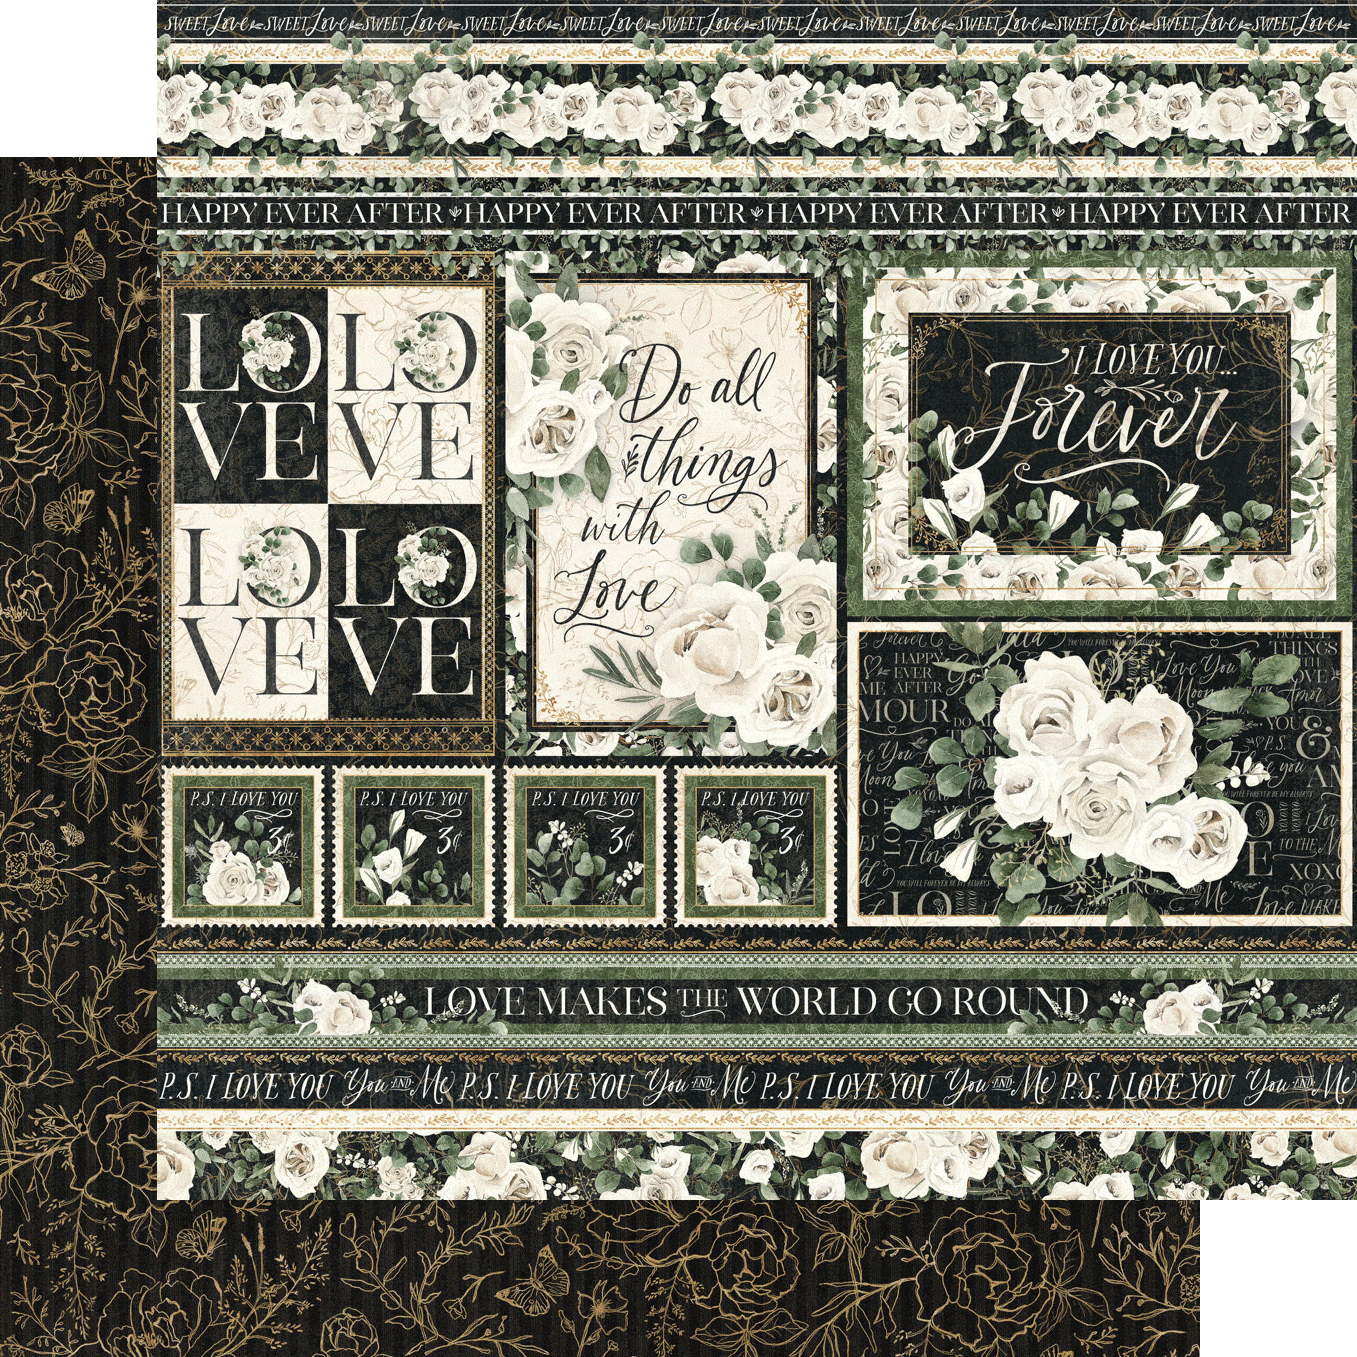 P.S. I Love You Collection Happy Ever After 12 x 12 Double-Sided Scrapbook Paper by Graphic 45 - Scrapbook Supply Companies